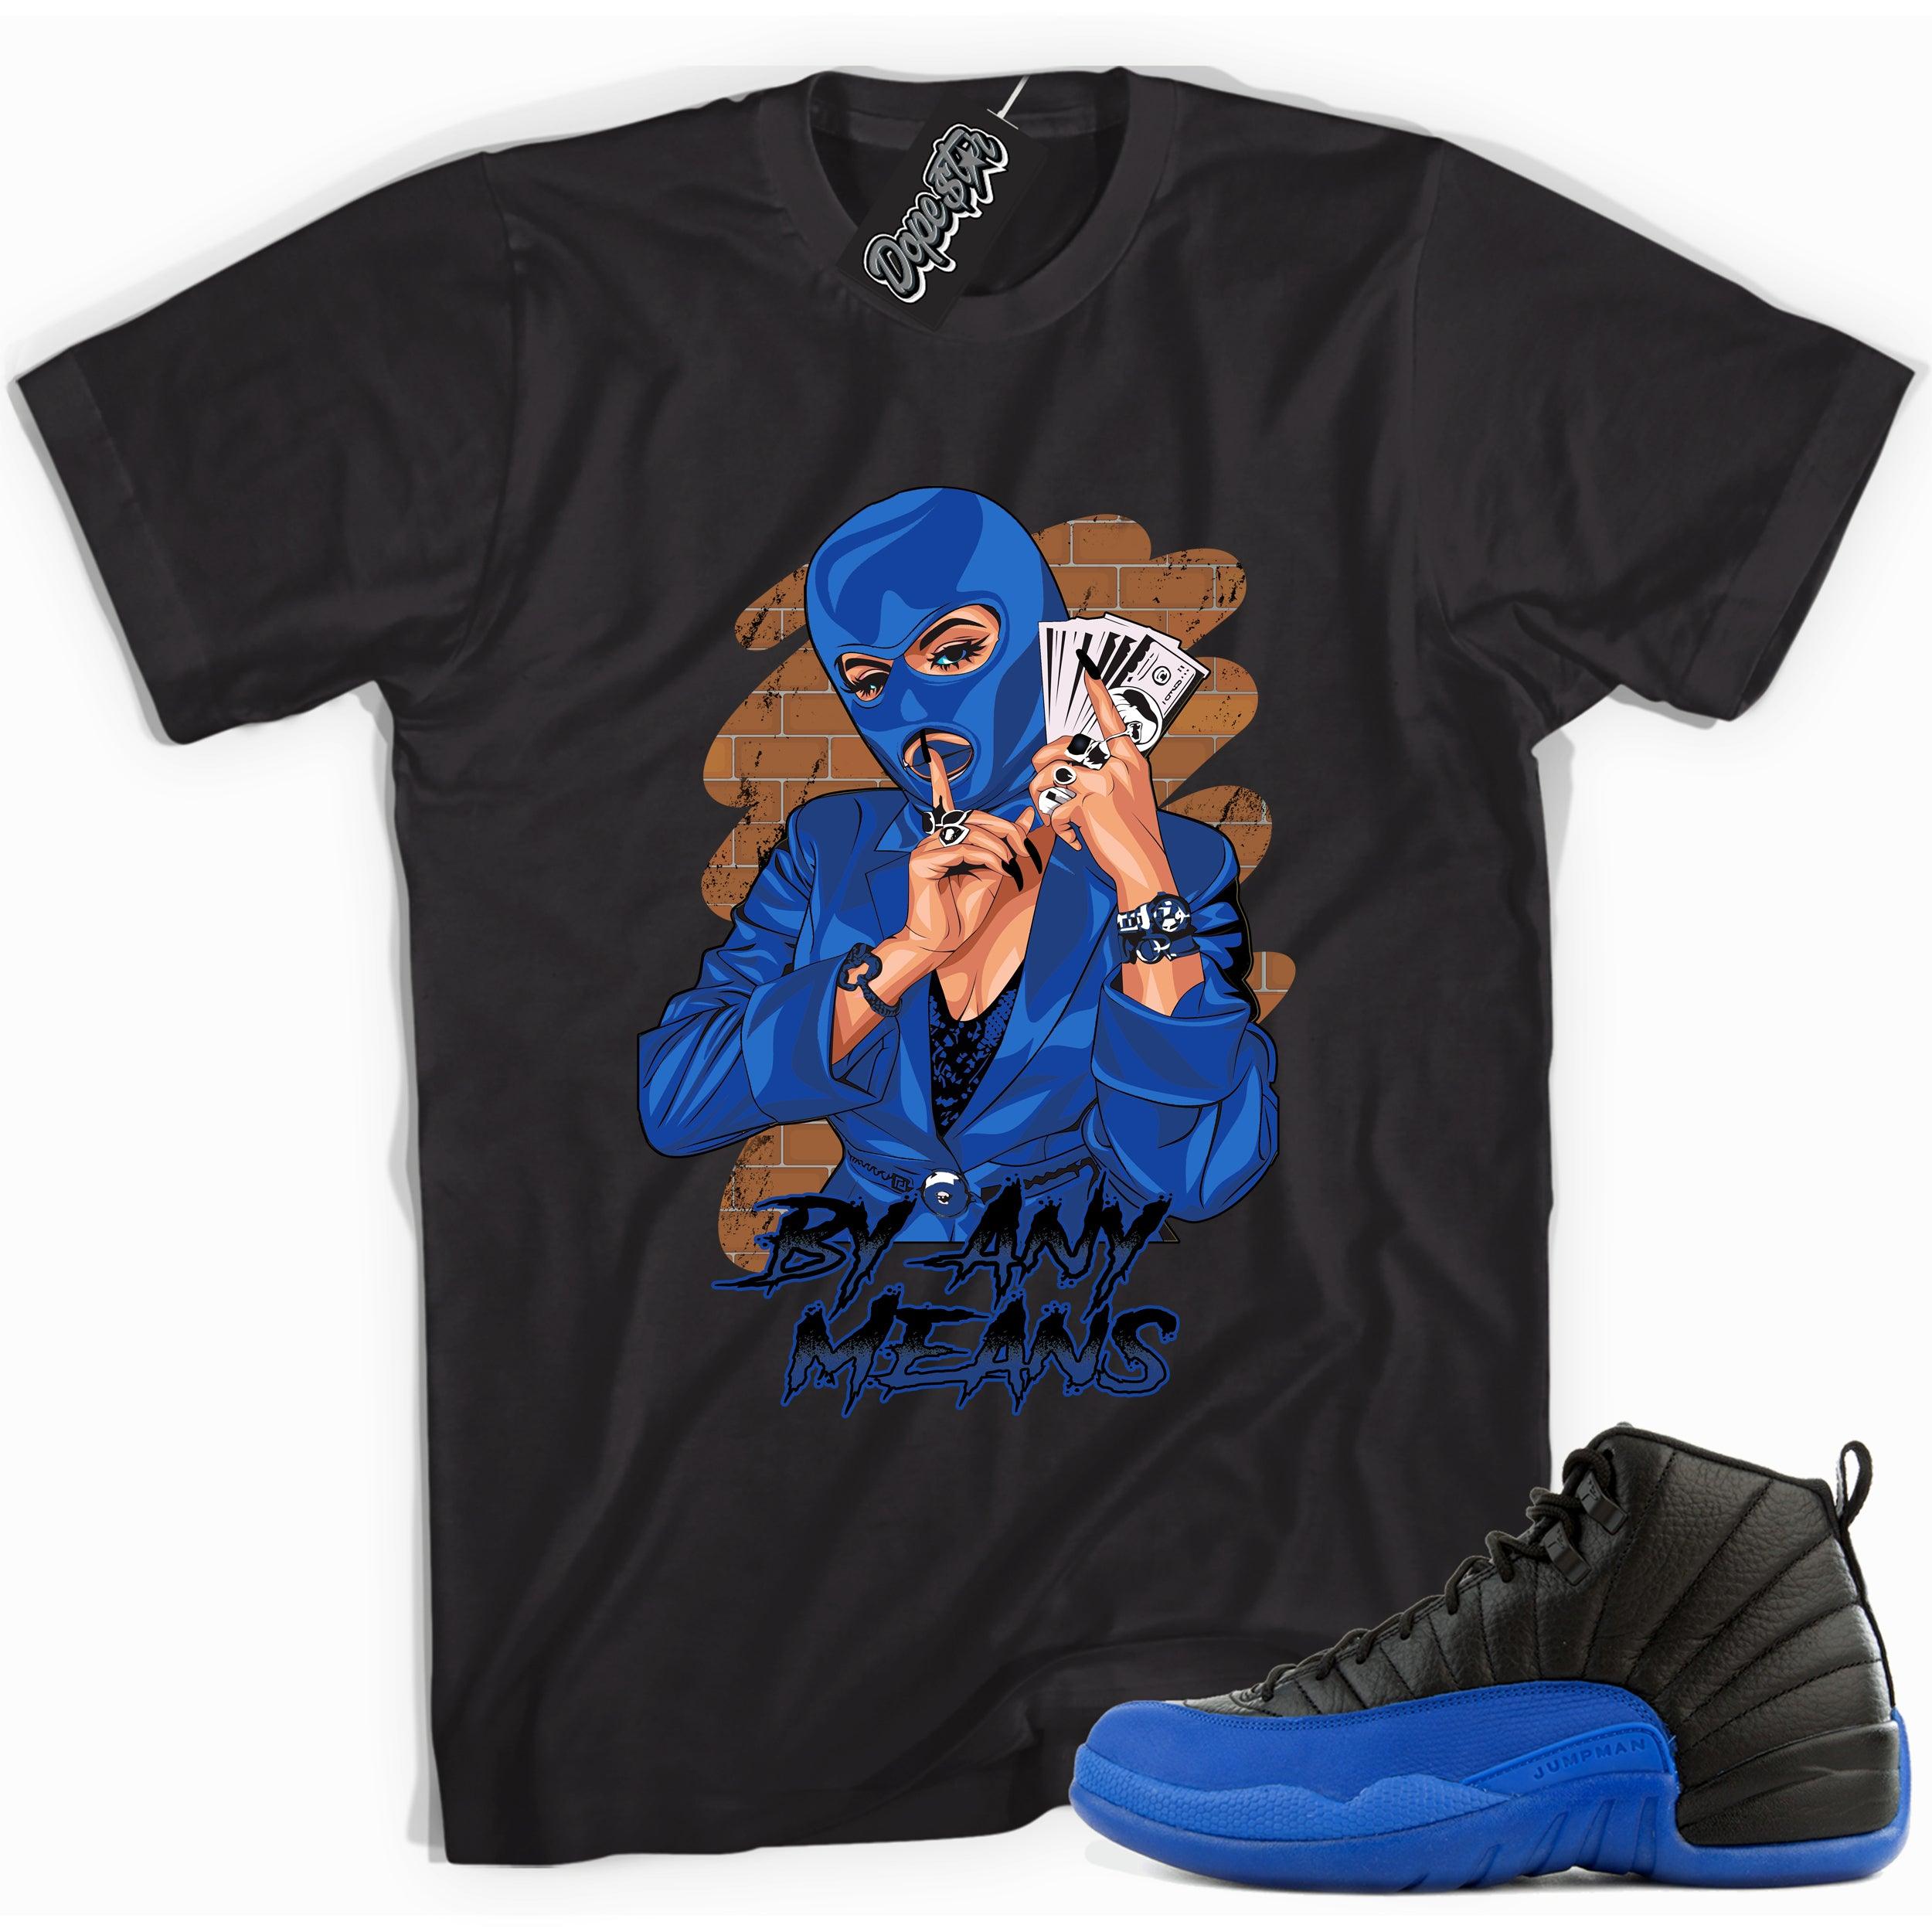 Cool black graphic tee with 'by any means' print, that perfectly matches  Air Jordan 12 Retro Black Game Royal sneakers.